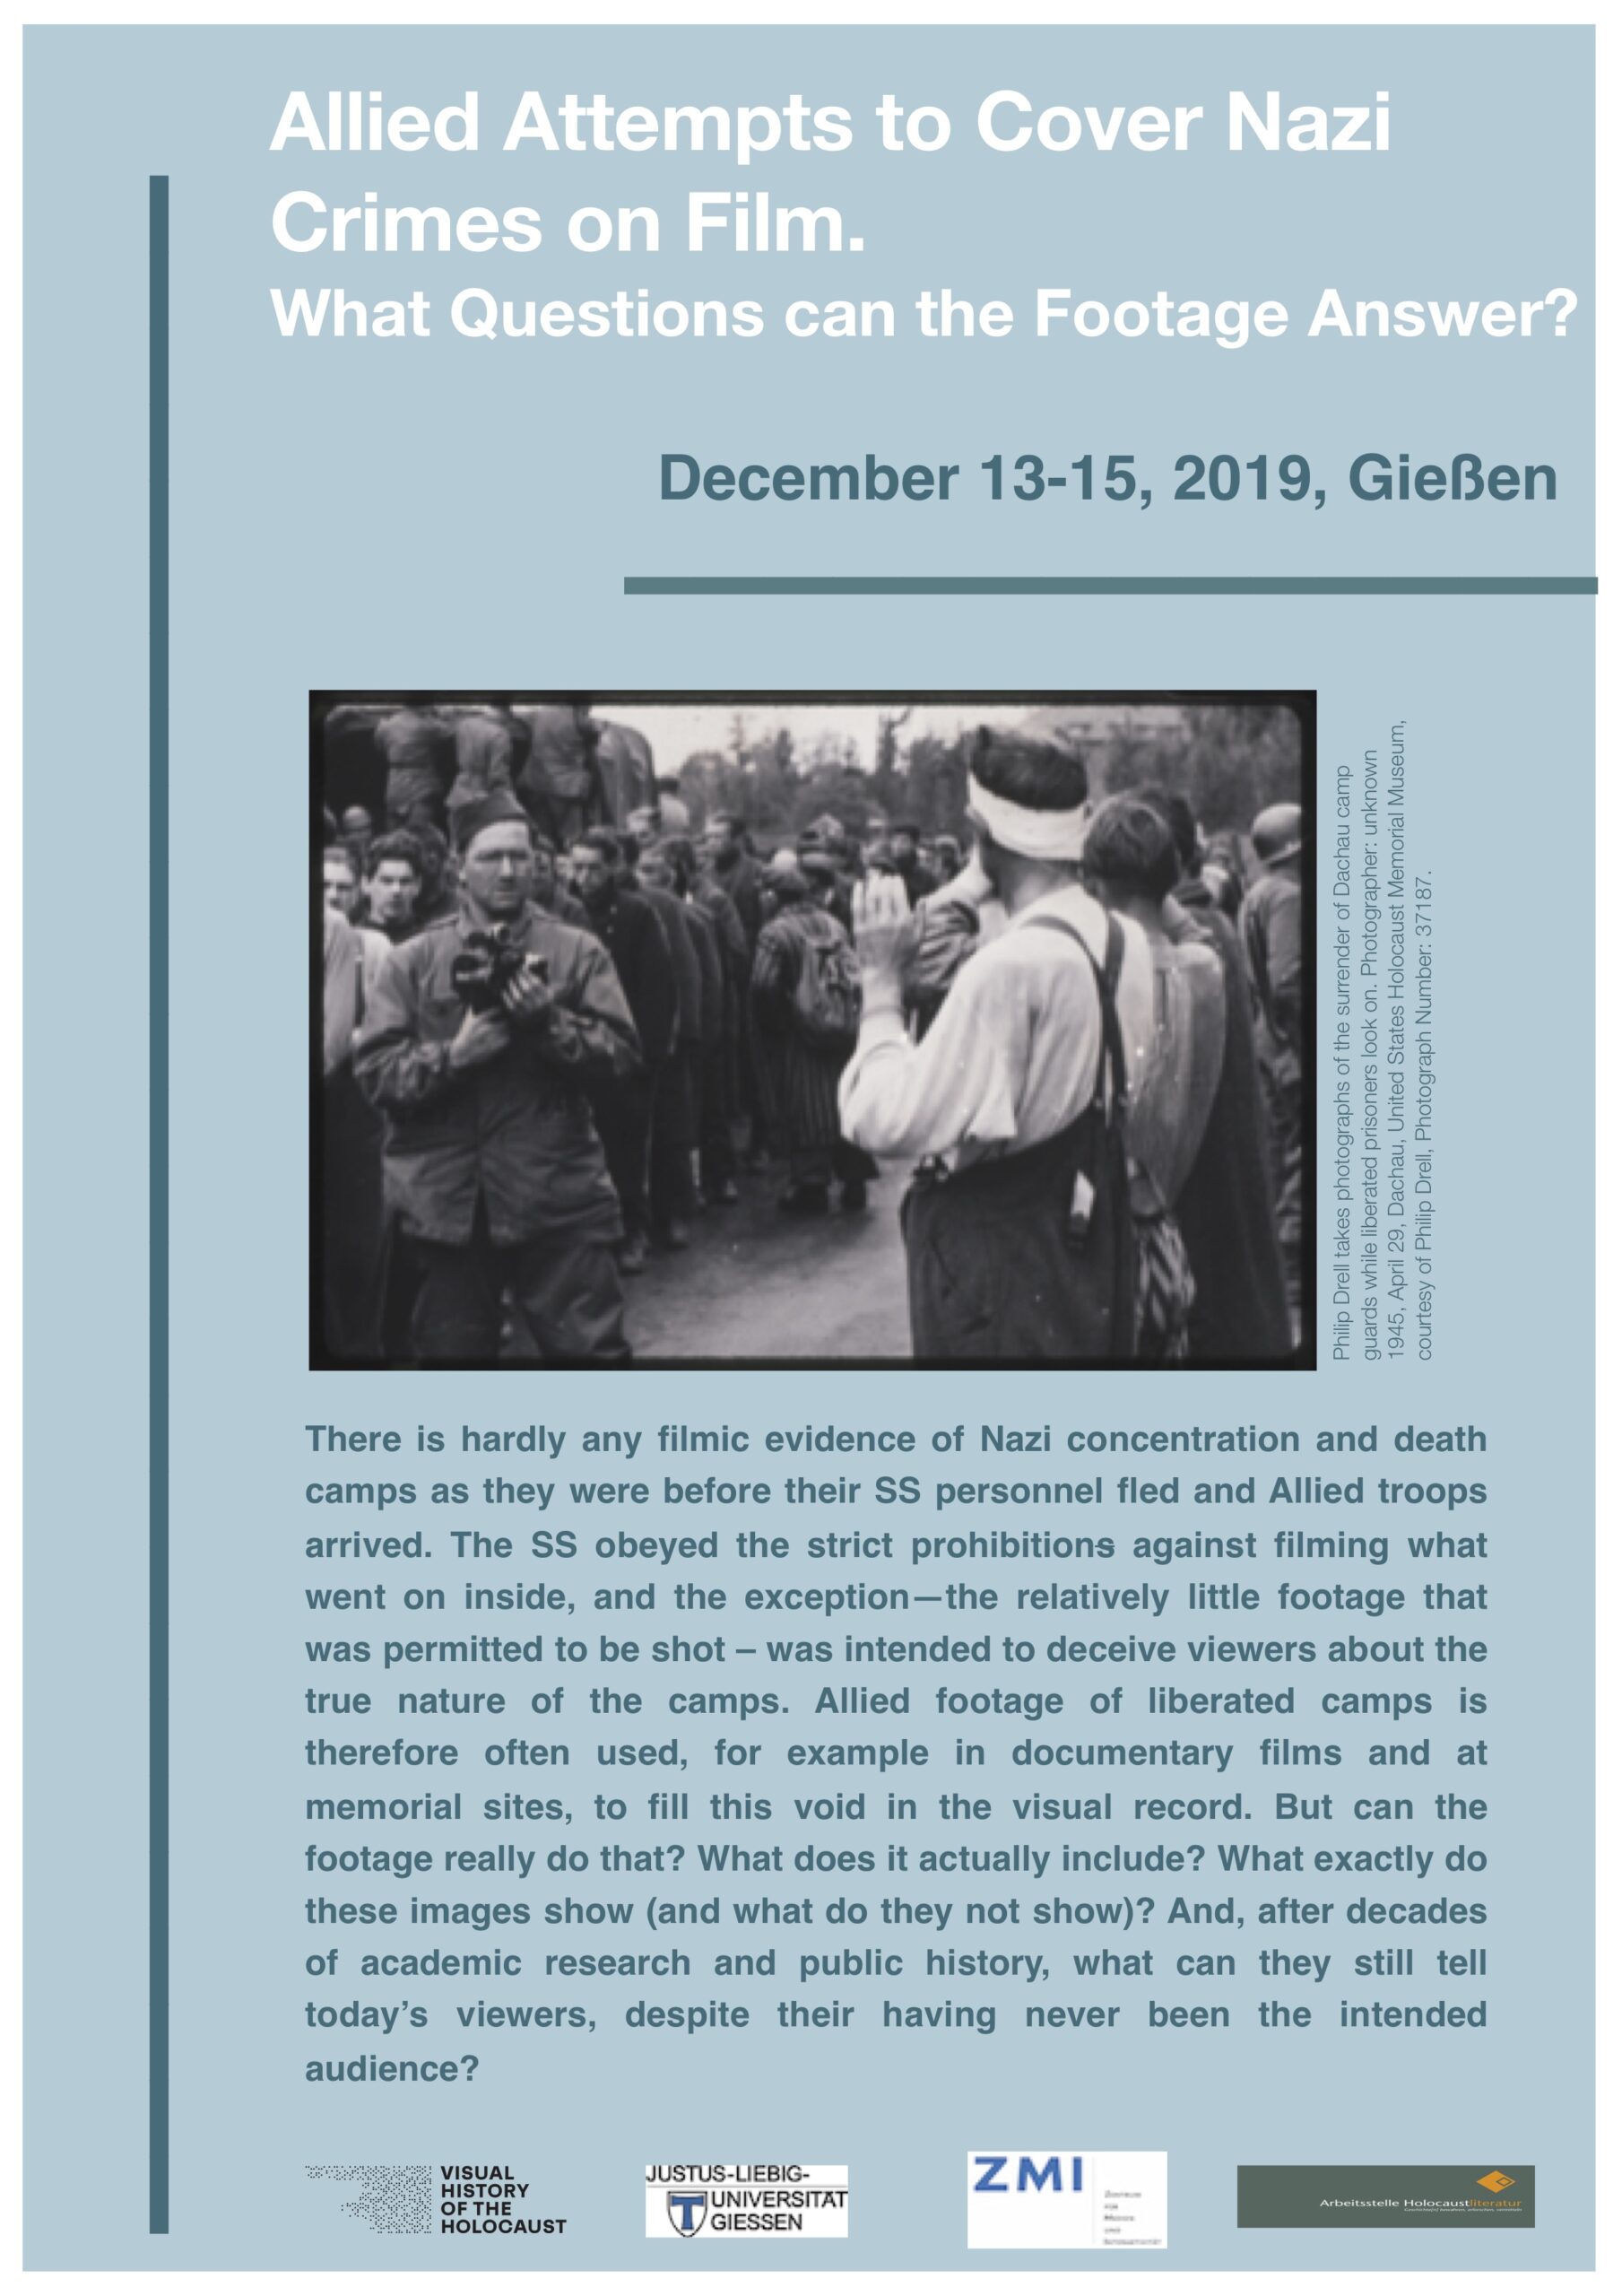 This event poster shows written text with the event details and a photograph of the surrender of Dachau camp.